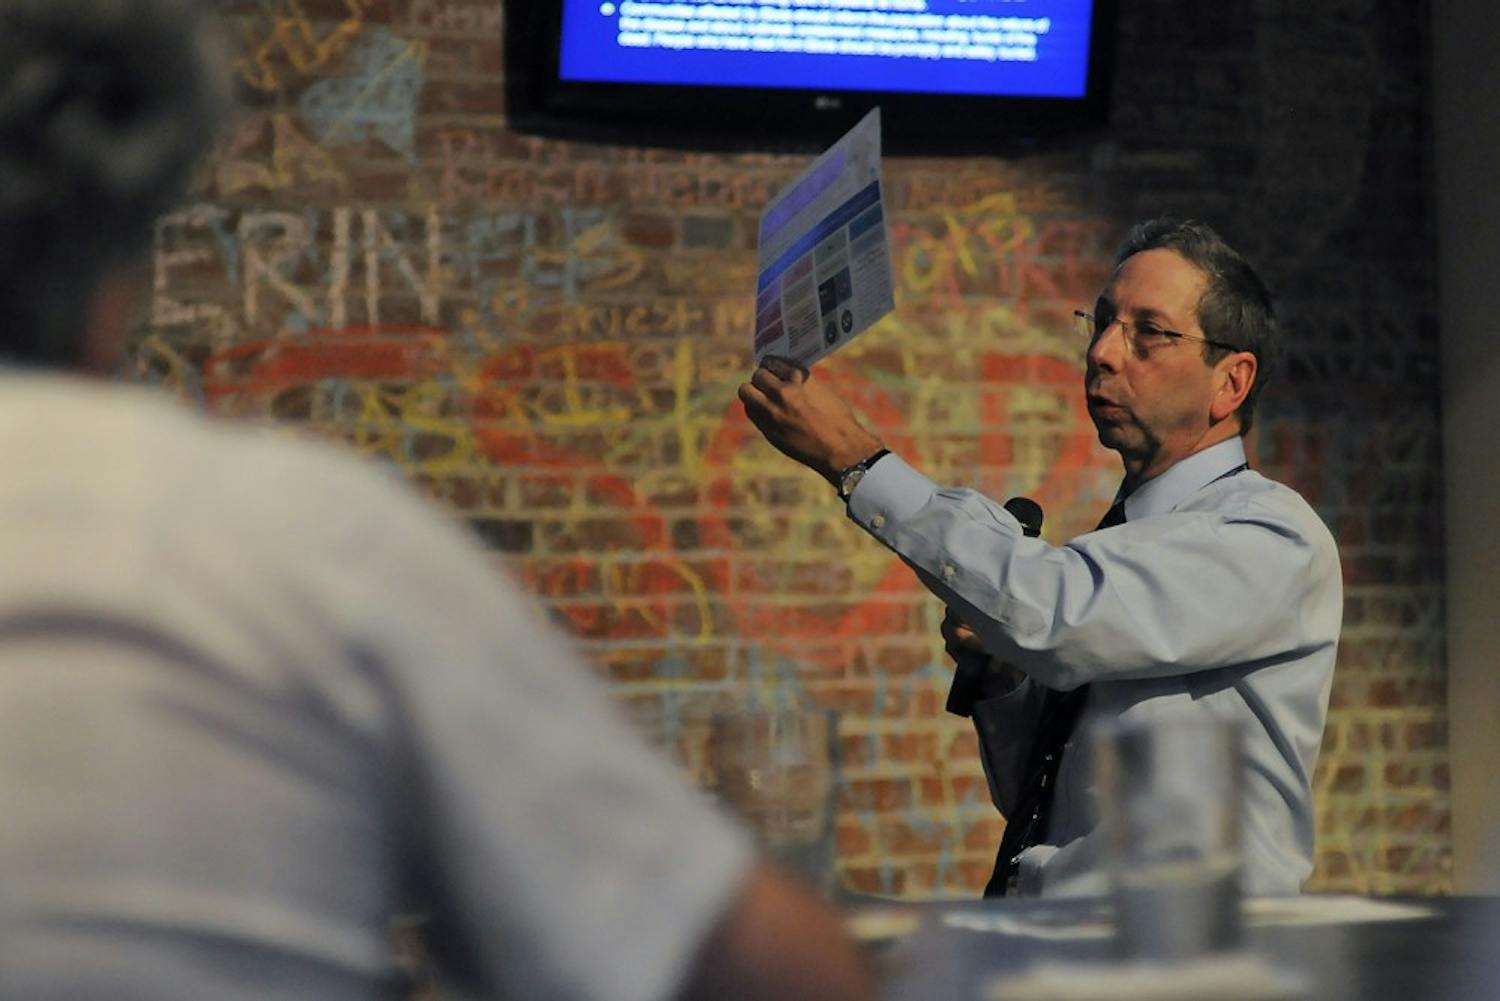 Dr. David Weber speaks at Morehead Planetariums's science awareness program, Carolina Science Cafe, in Top of the Hill's Back Bar.  At monthly educational program for adults, he spoke about the recent outbreak of Ebola in West Africa.